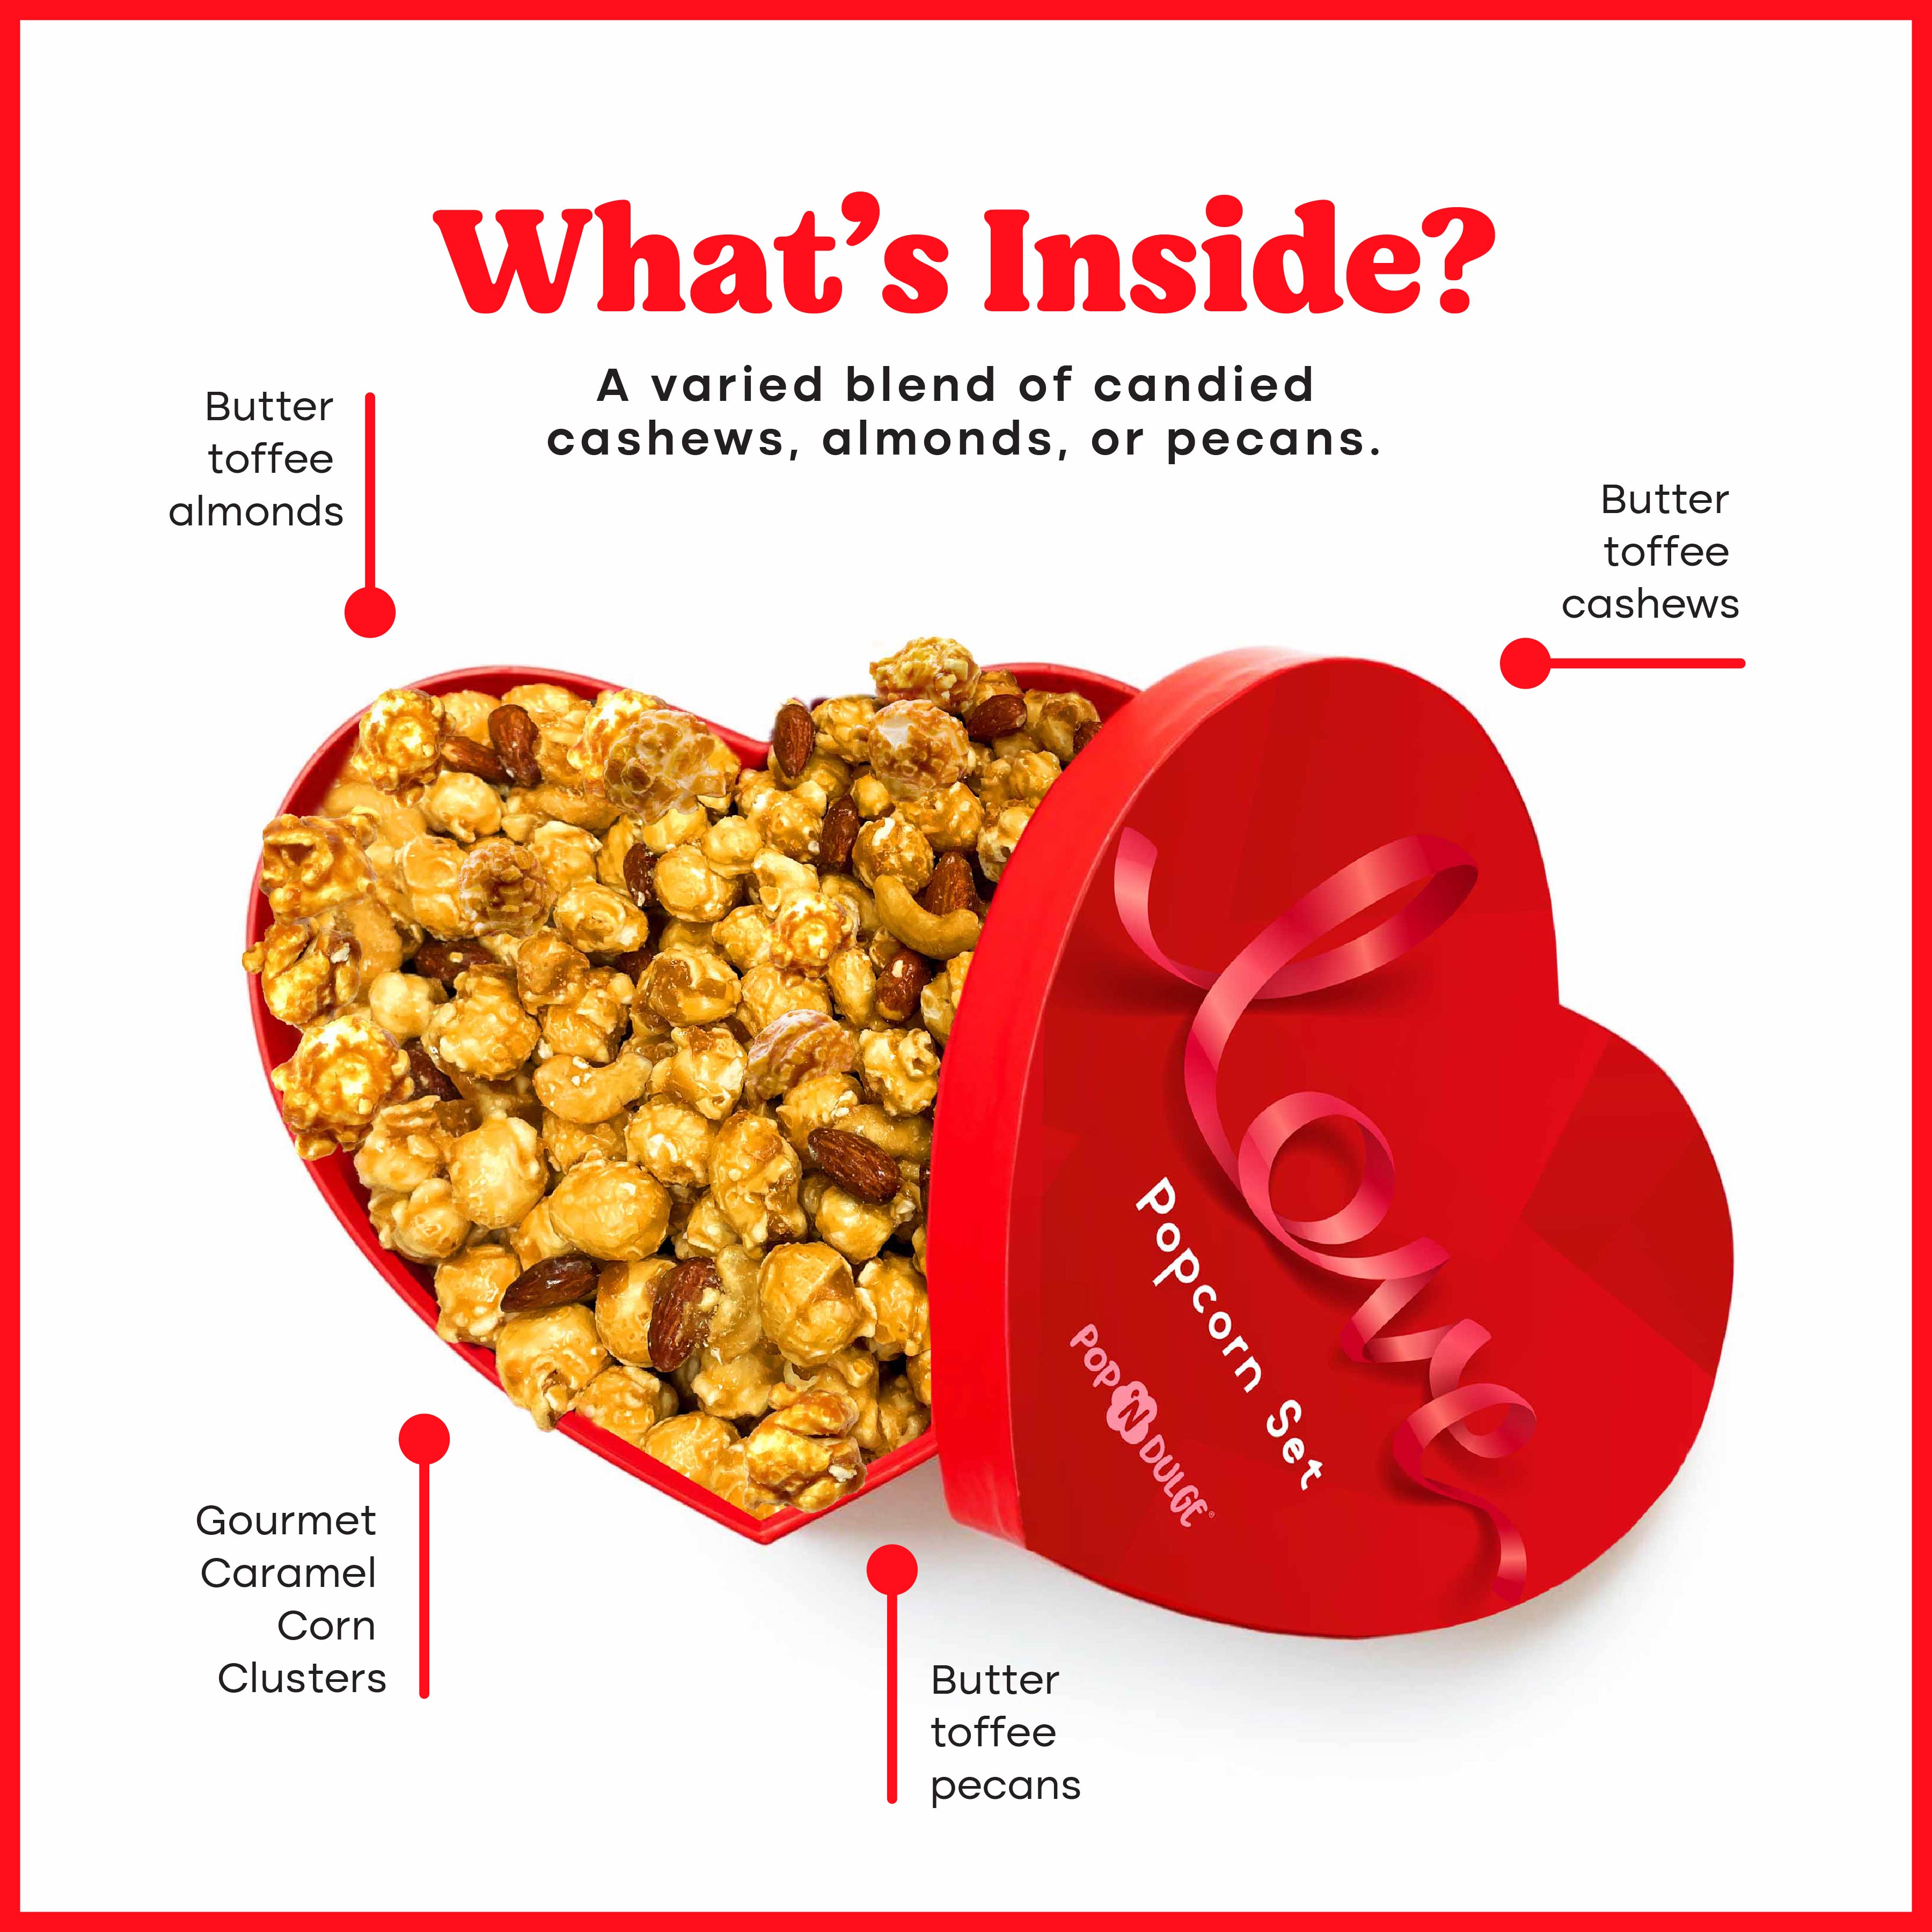 Gourmet Popcorn Caramel and Candied Nuts Heart-Shaped Gift Box